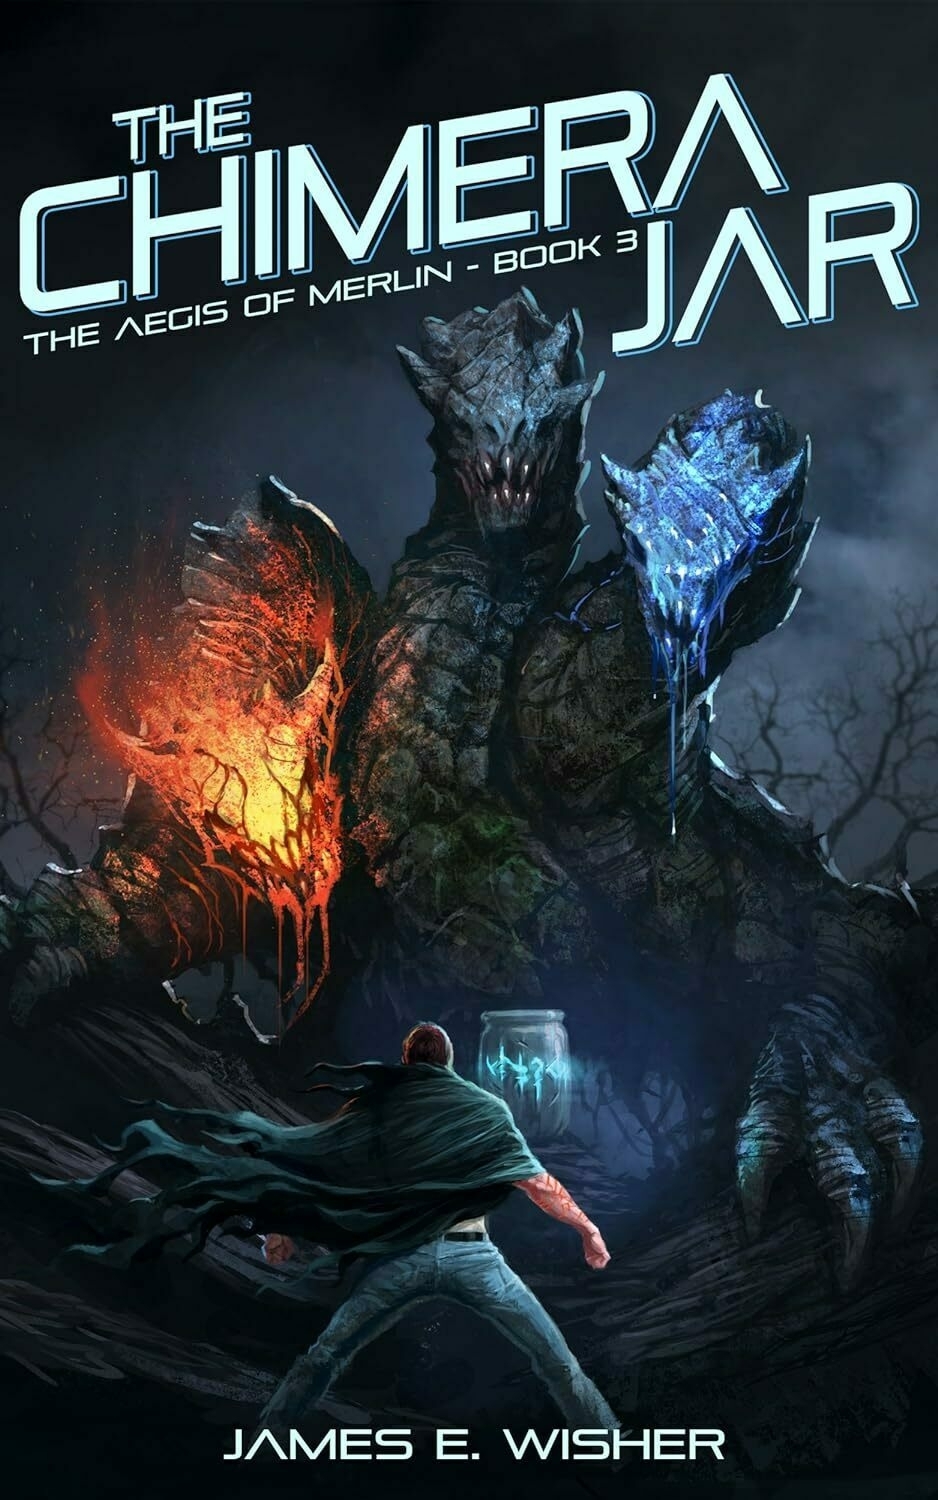 A person stands facing a massive, two-headed creature with fiery and icy elements, in a dark, forested backdrop. Text: 'THE CHIMERA JAR THE AEGIS OF MERLIN - BOOK 3 JAMES E. WISHER'.